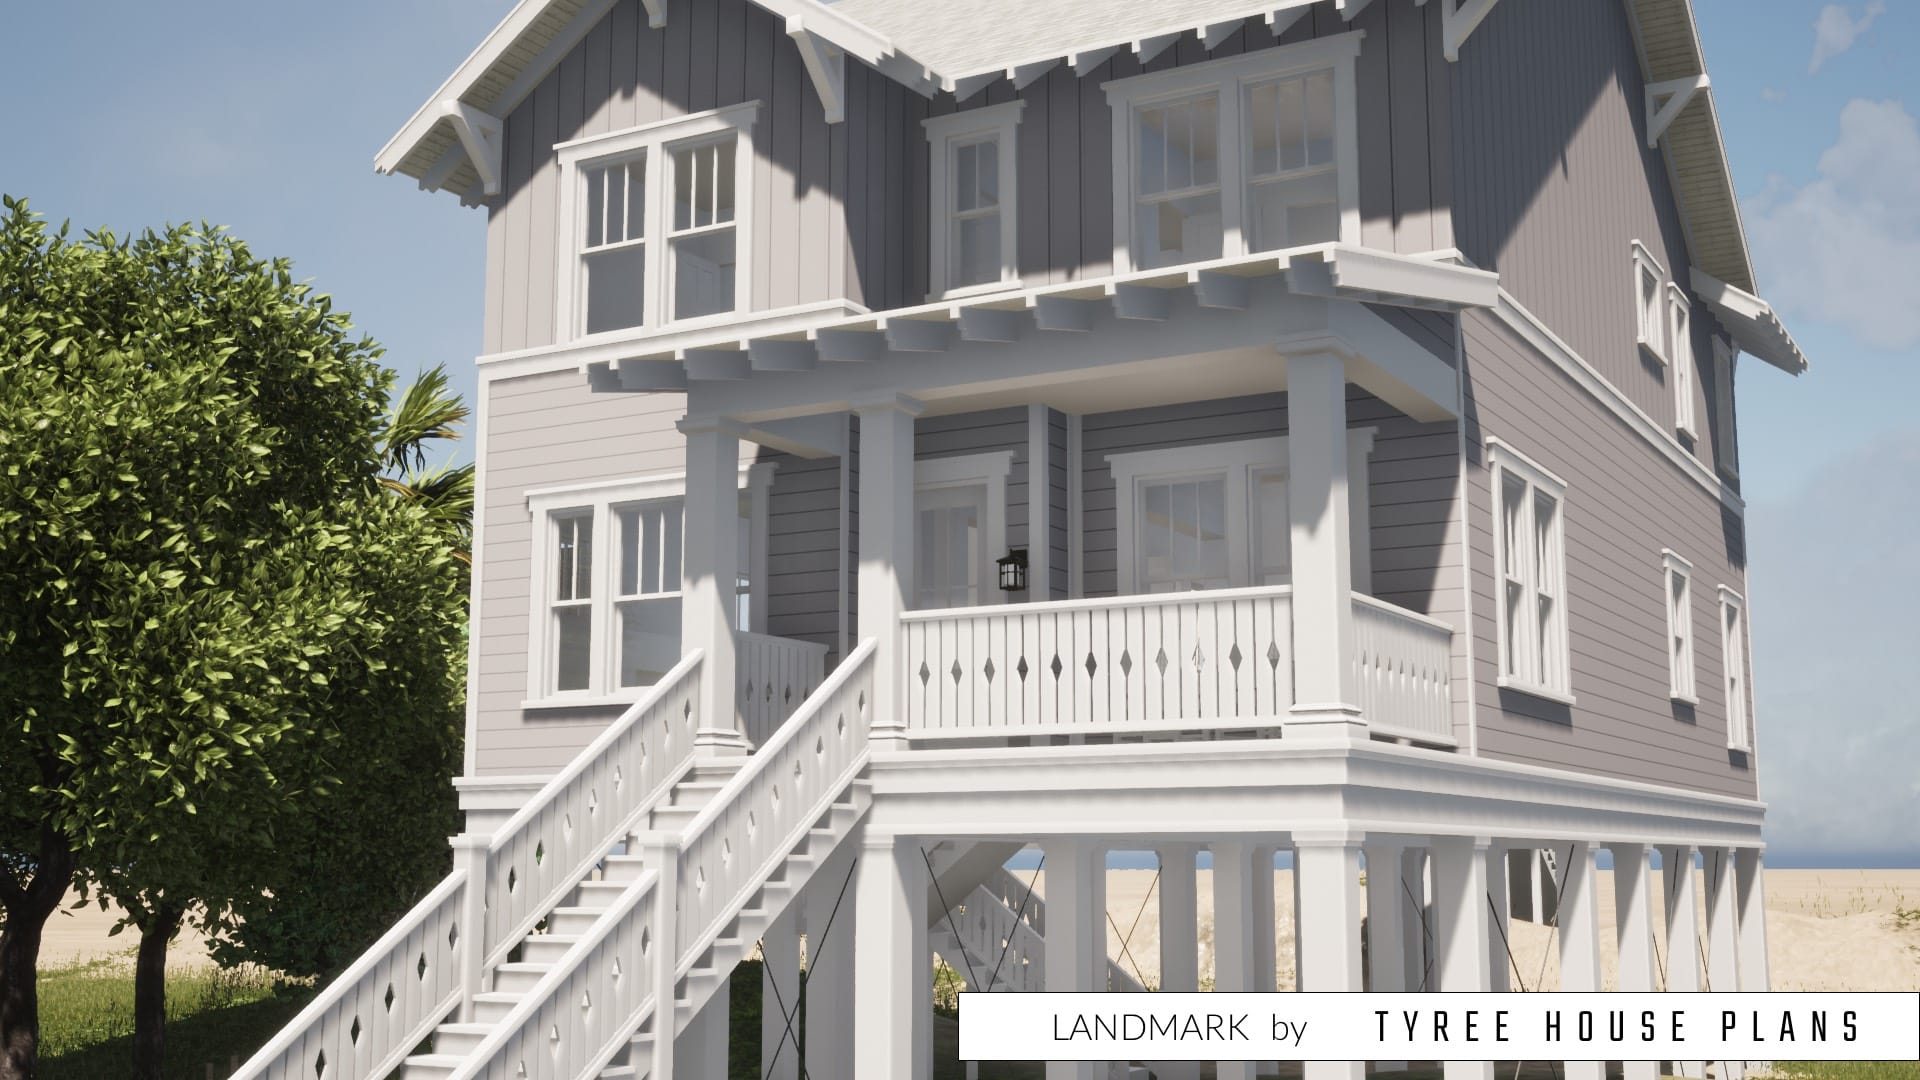 Front view with stairs and decorative porch. Landmark by Tyree House Plans.